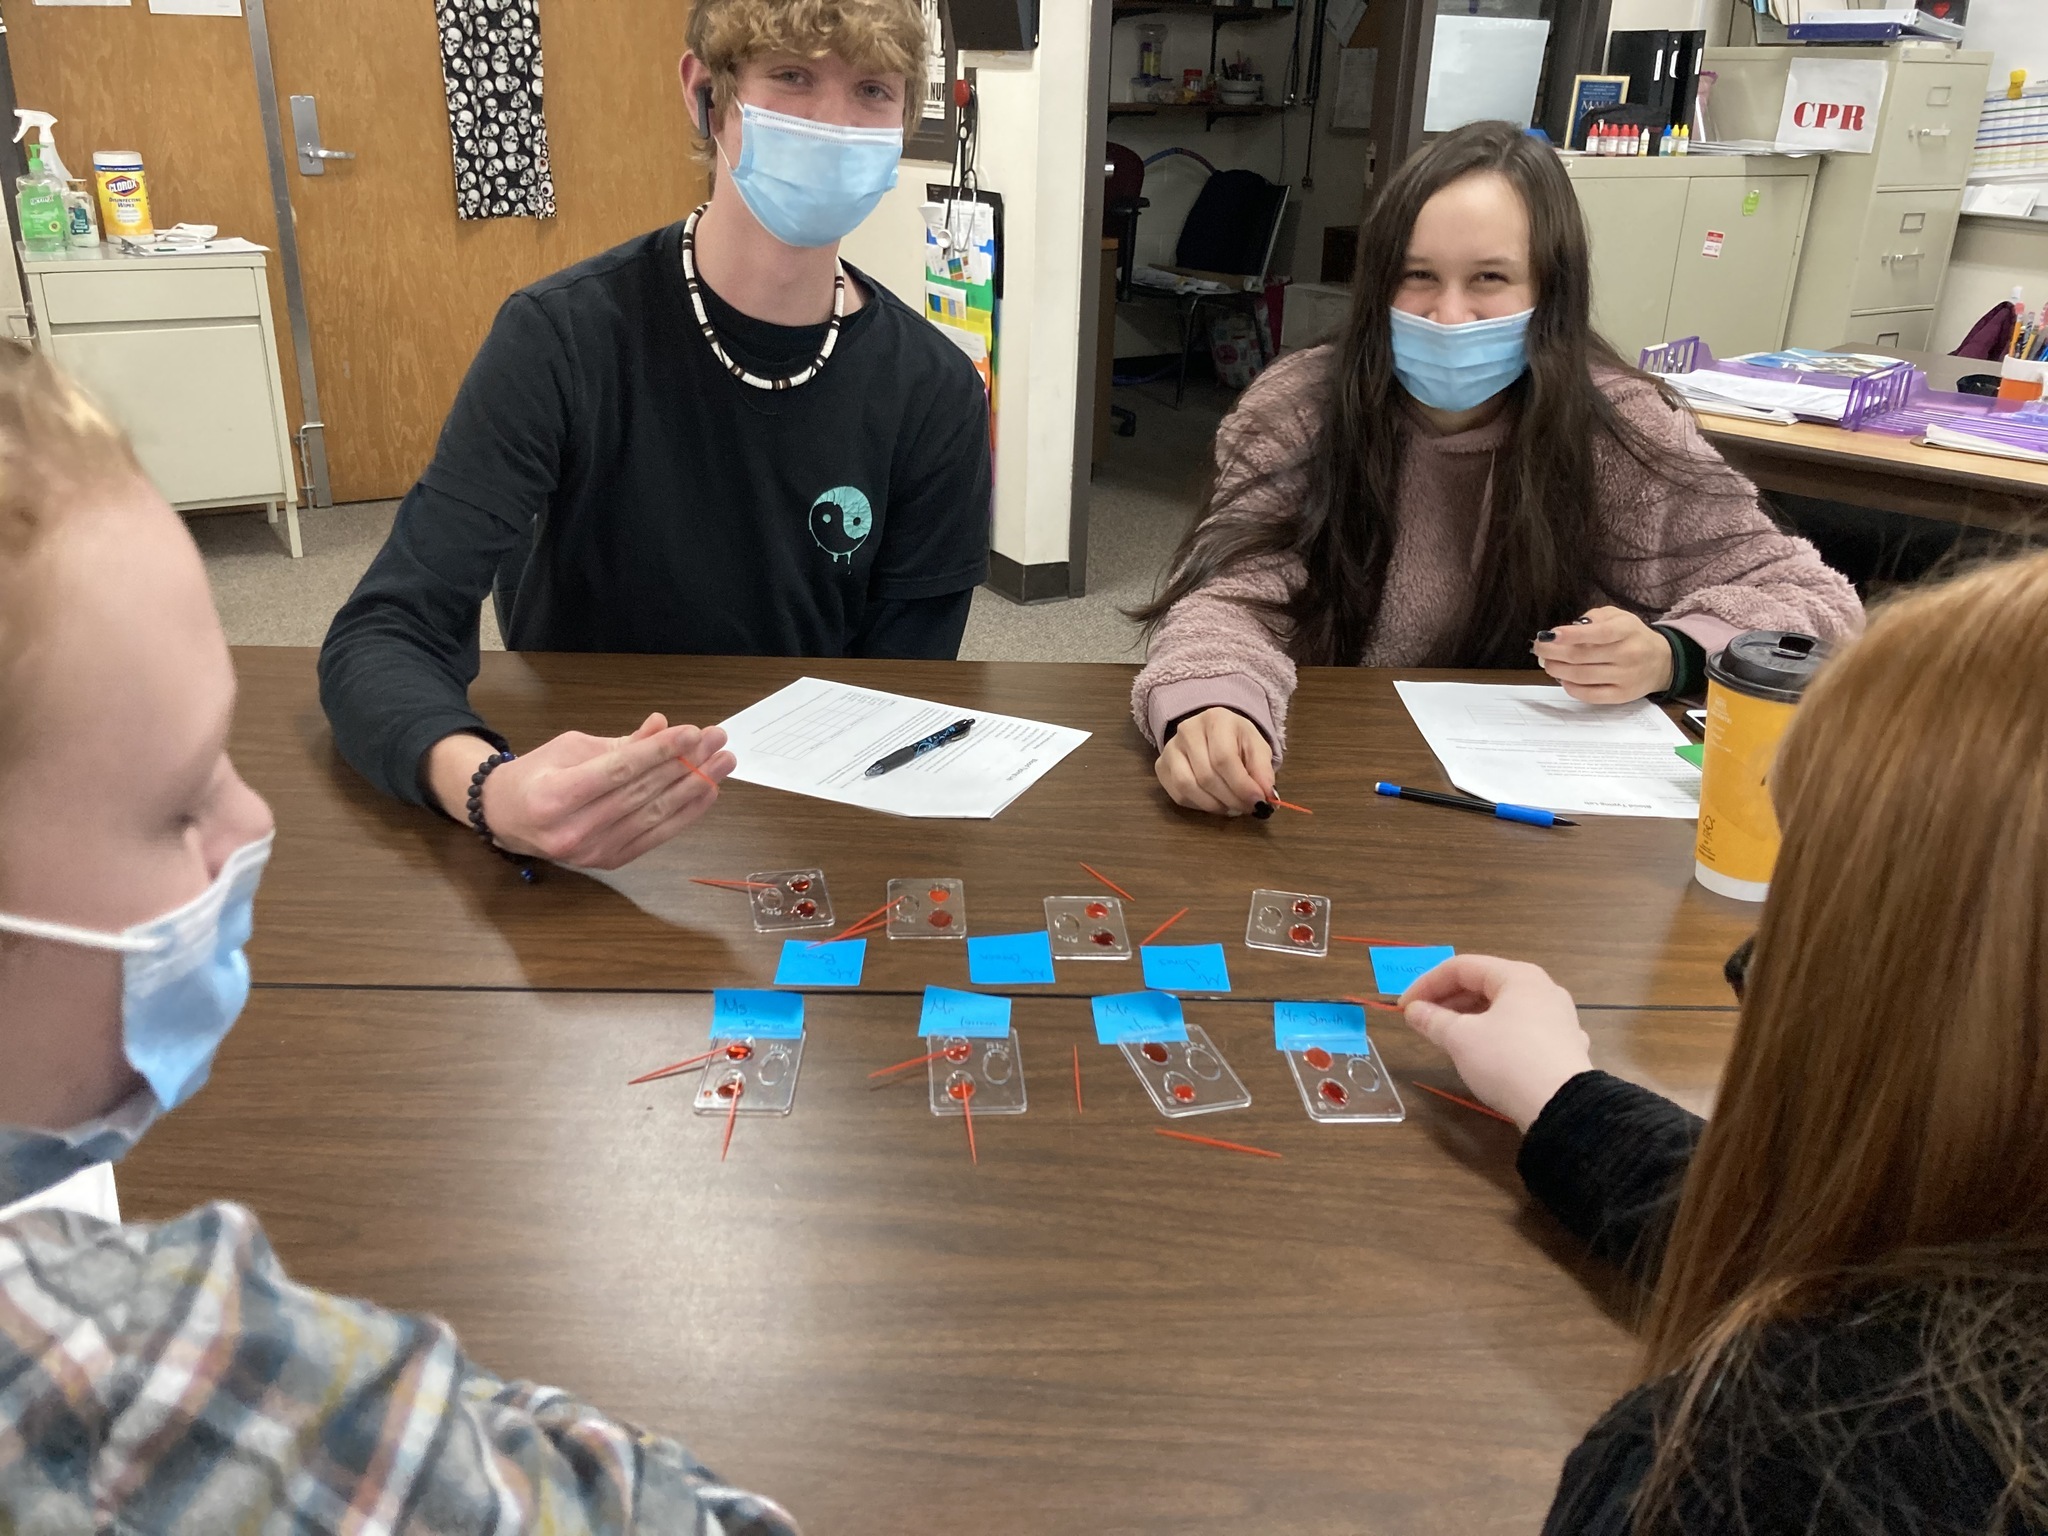 Health students doing an activity in class.